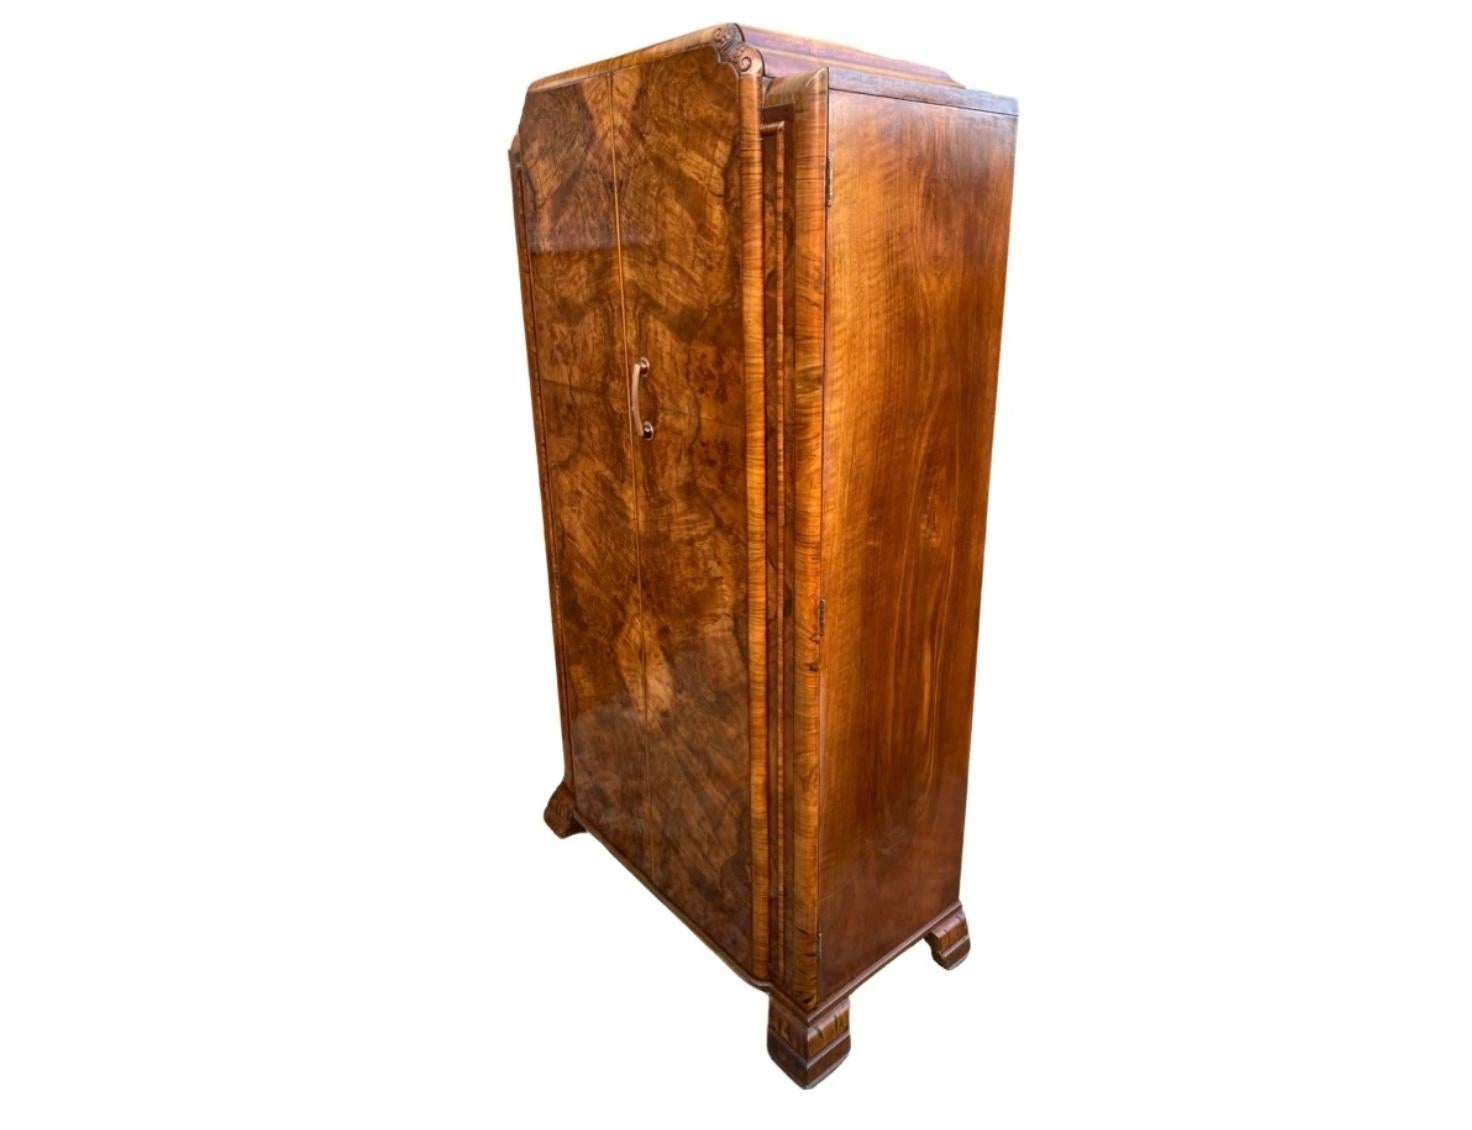 We are pleased to offer this attractive and extremely useful 3/4 size single Art Deco Wardrobe dating from circa 1930. The doors are a gorgeous conker colour with fabulous figured walnut veneers. They open to reveal a most useful fitted interior, to